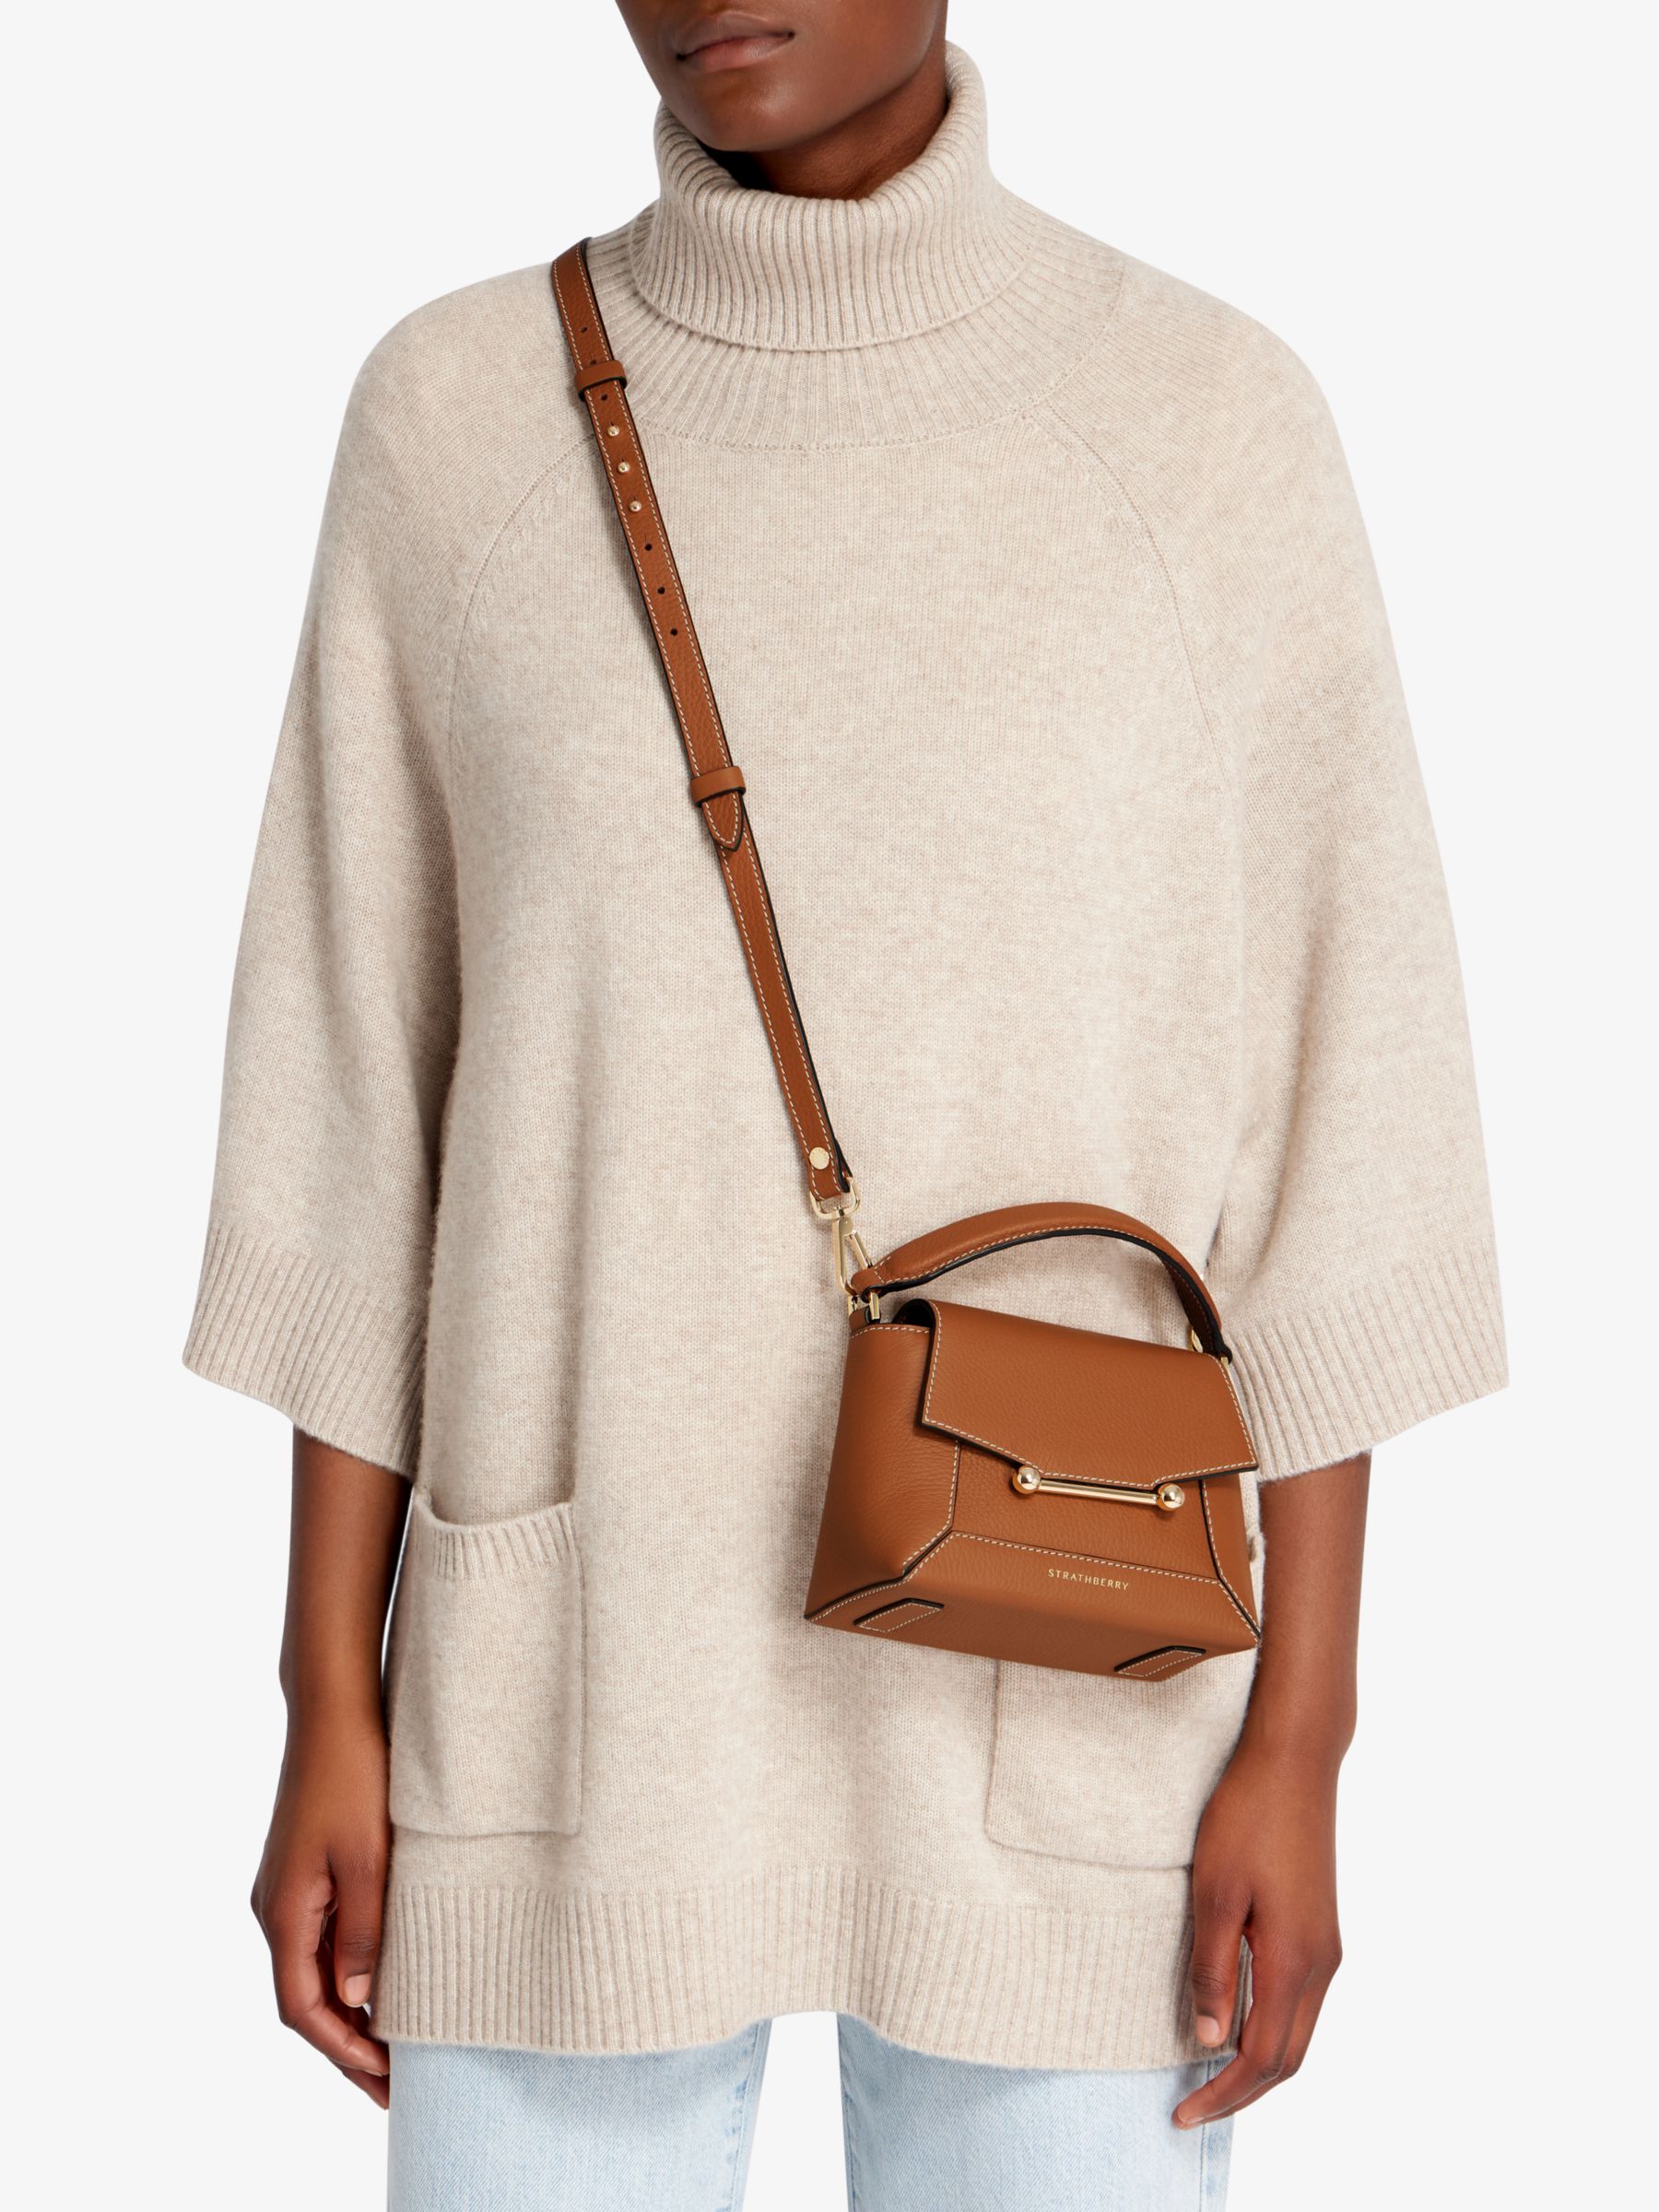 Buy Strathberry Mosaic Nano Leather Cross Body Bag, Tan Online at johnlewis.com